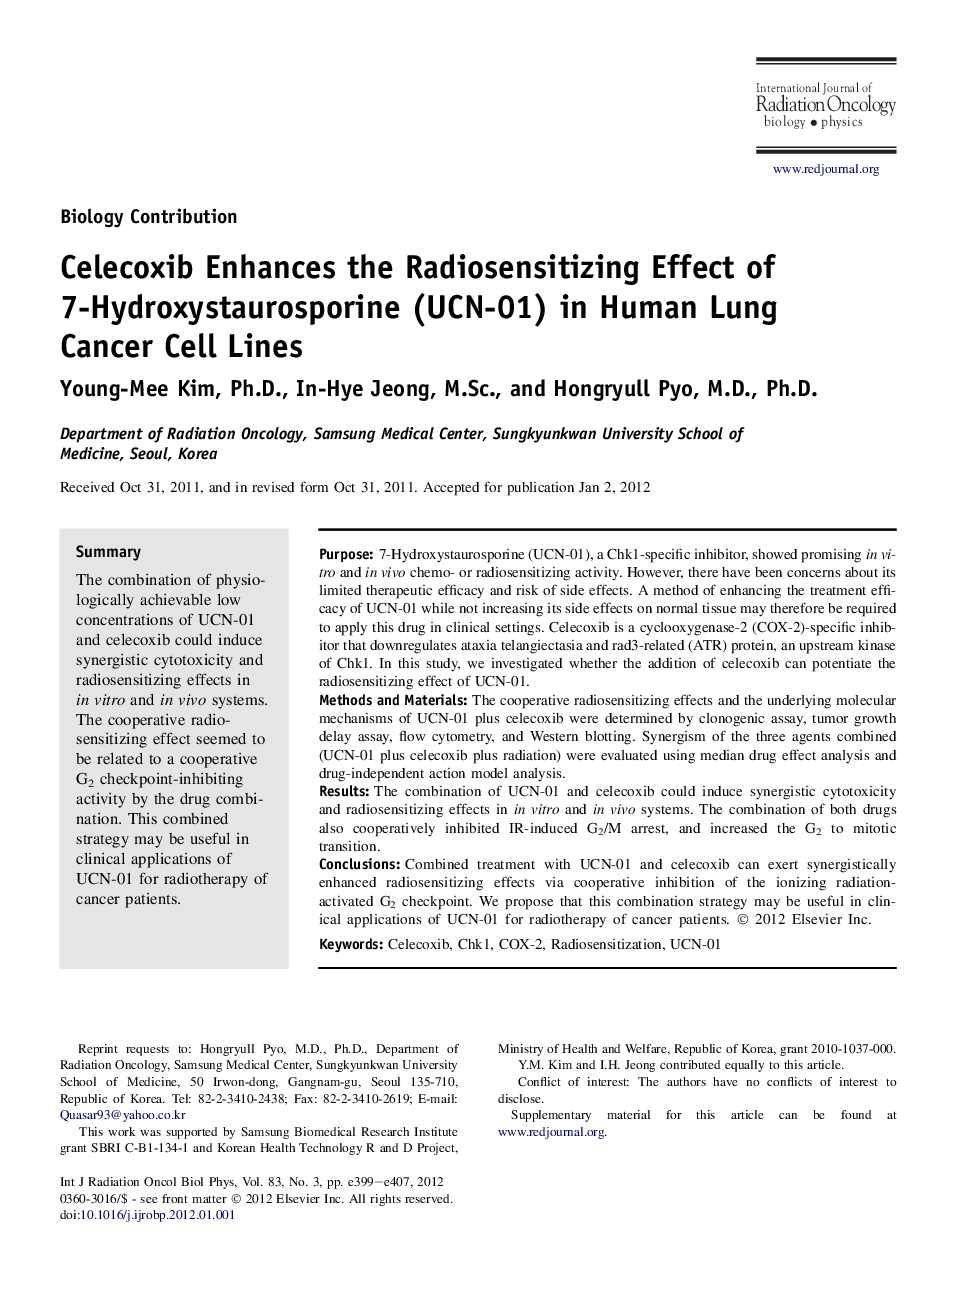 Celecoxib Enhances the Radiosensitizing Effect of 7-Hydroxystaurosporine (UCN-01) in Human Lung Cancer Cell Lines